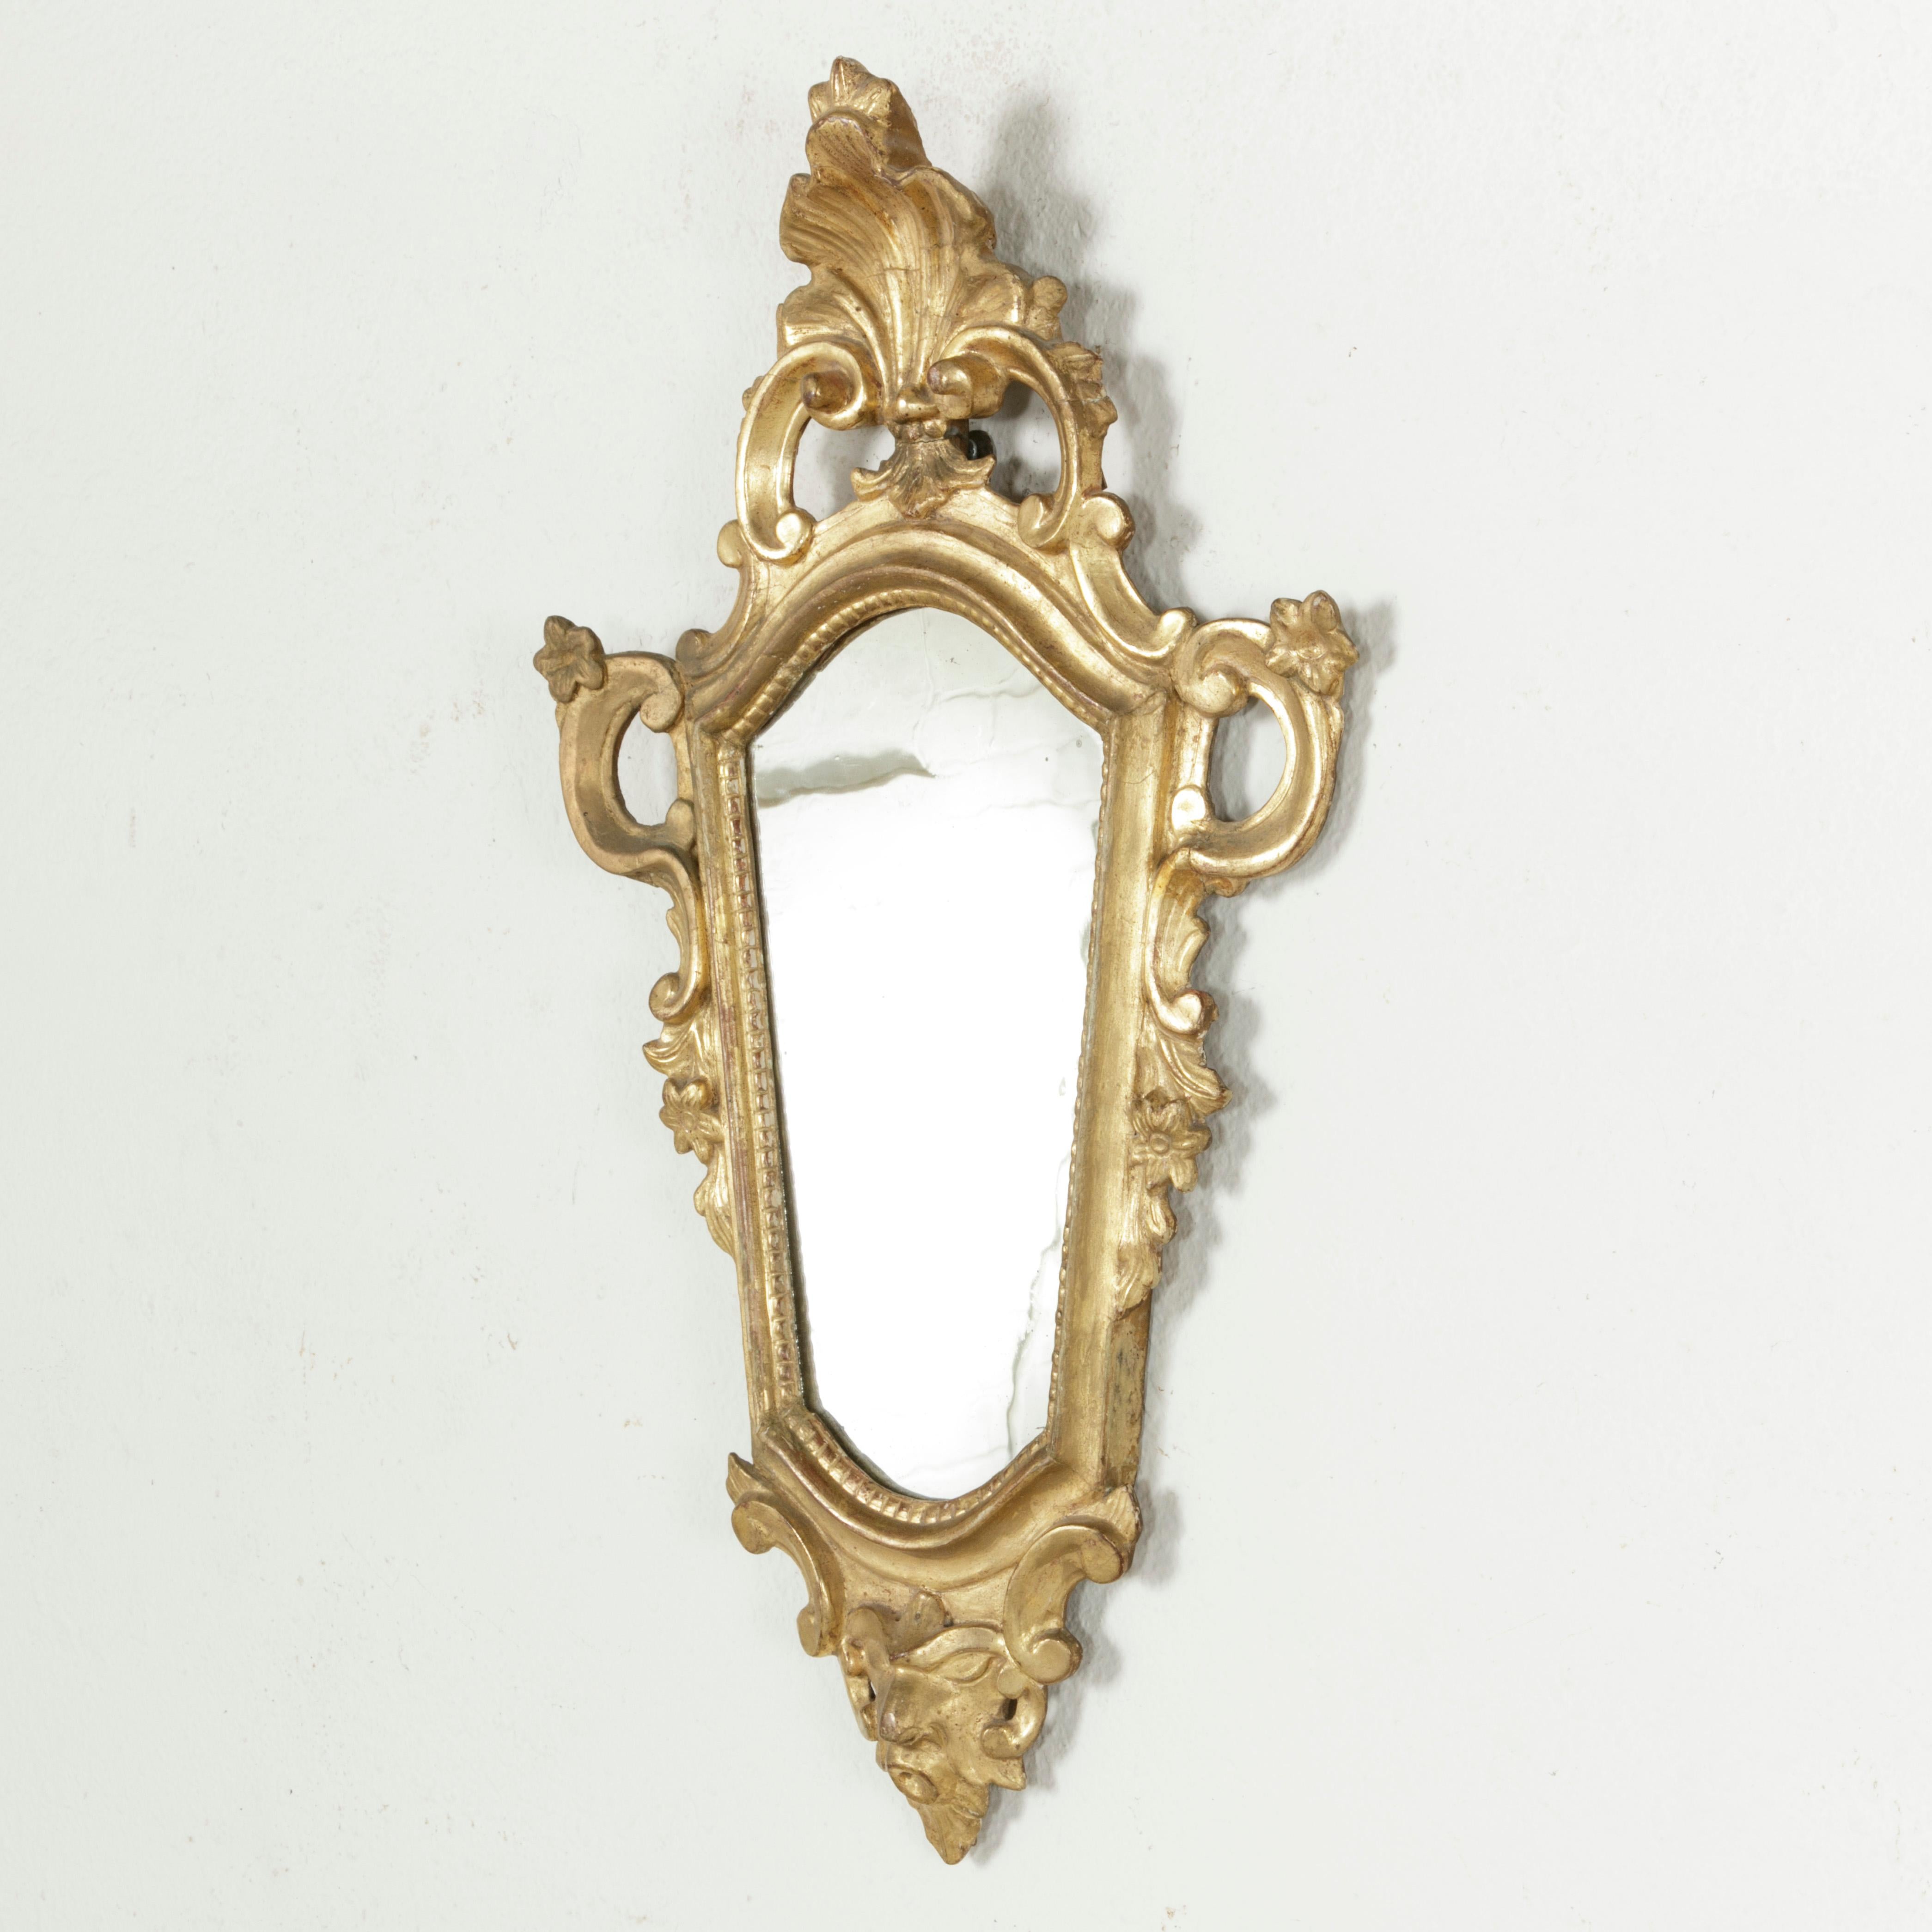 This small scale mid-18th century French Regency period giltwood mirror features its original mercury glass. Due to changes in atmosphere previously in its lifetime, a beautiful natural phenomenon of snowflake-like veining has formed in the glass.